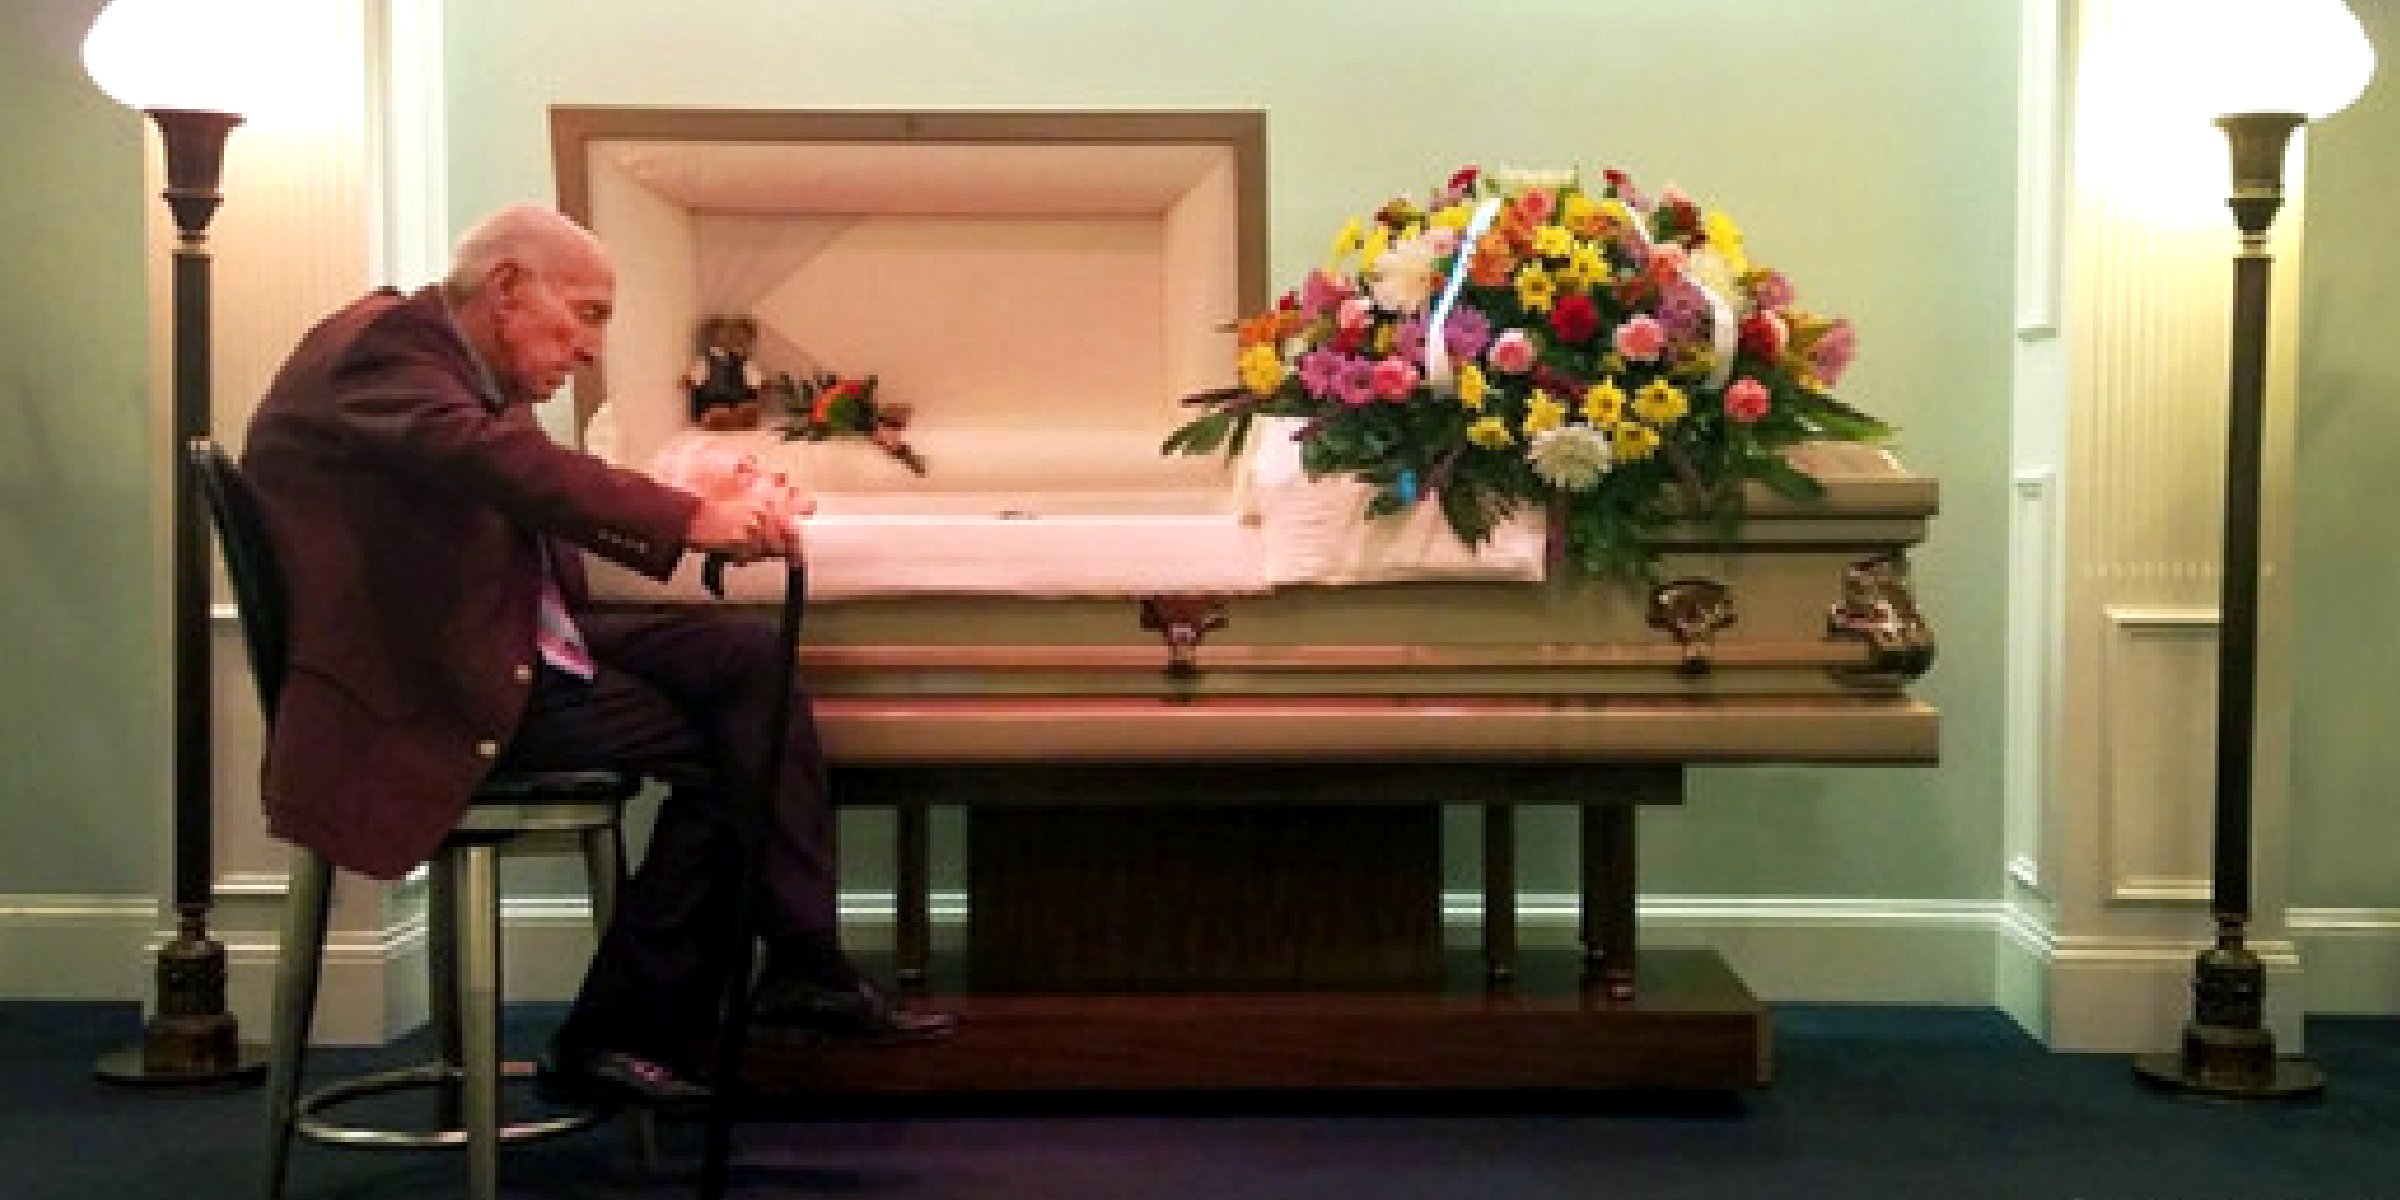 Bobby Moore next to his deceased wife's coffin | Source: Facebook.com/april.shepperd